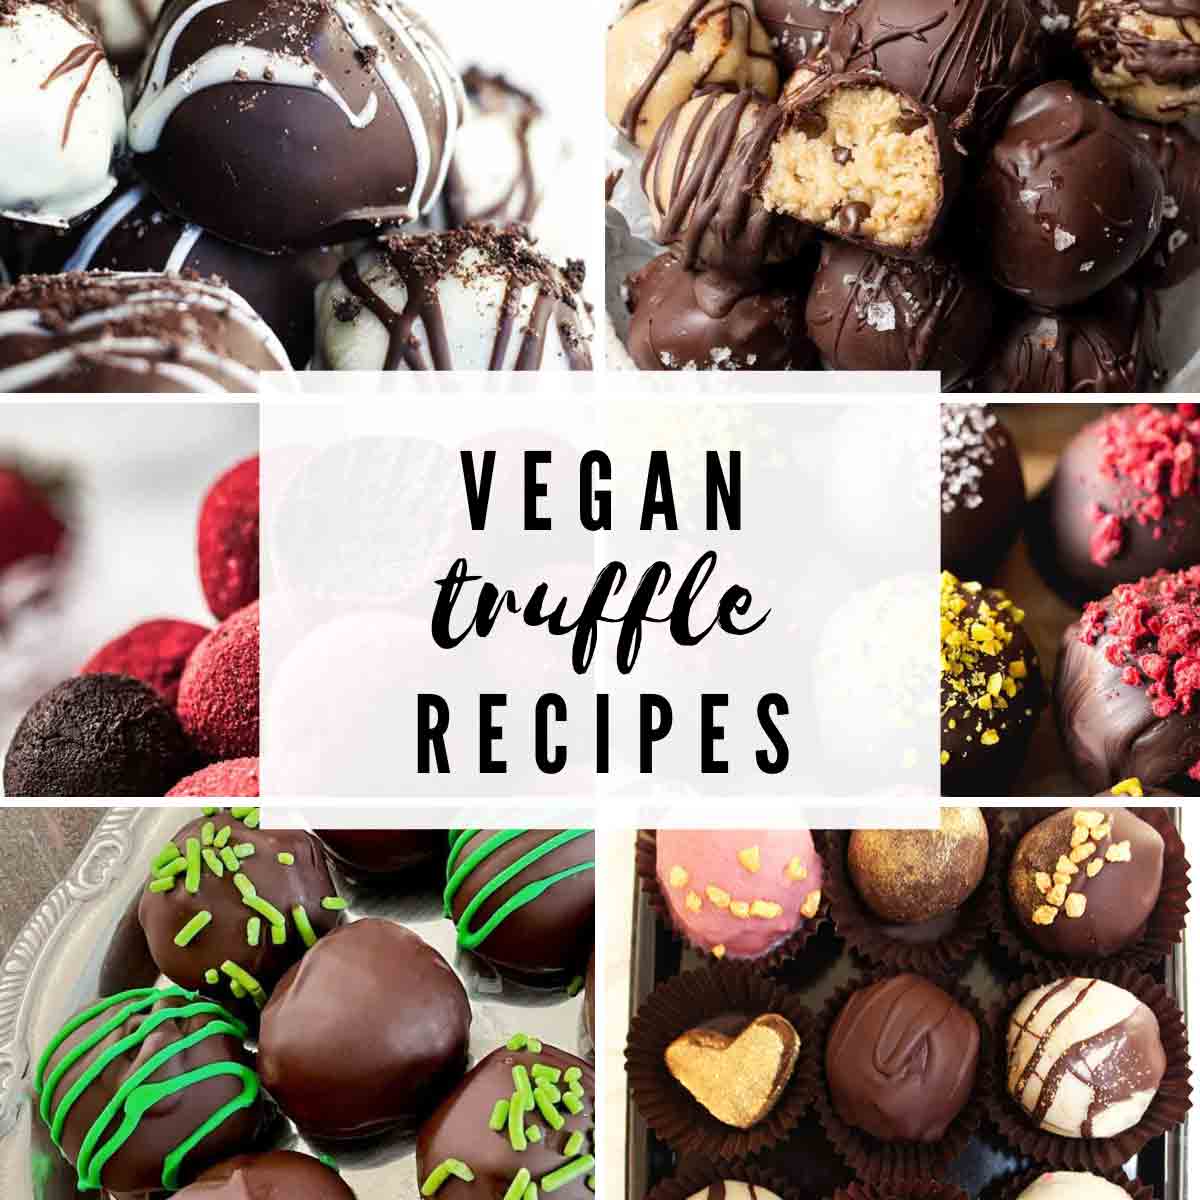 Truffle Images With Text Overlay Reading 'vegan Truffle Recipes'